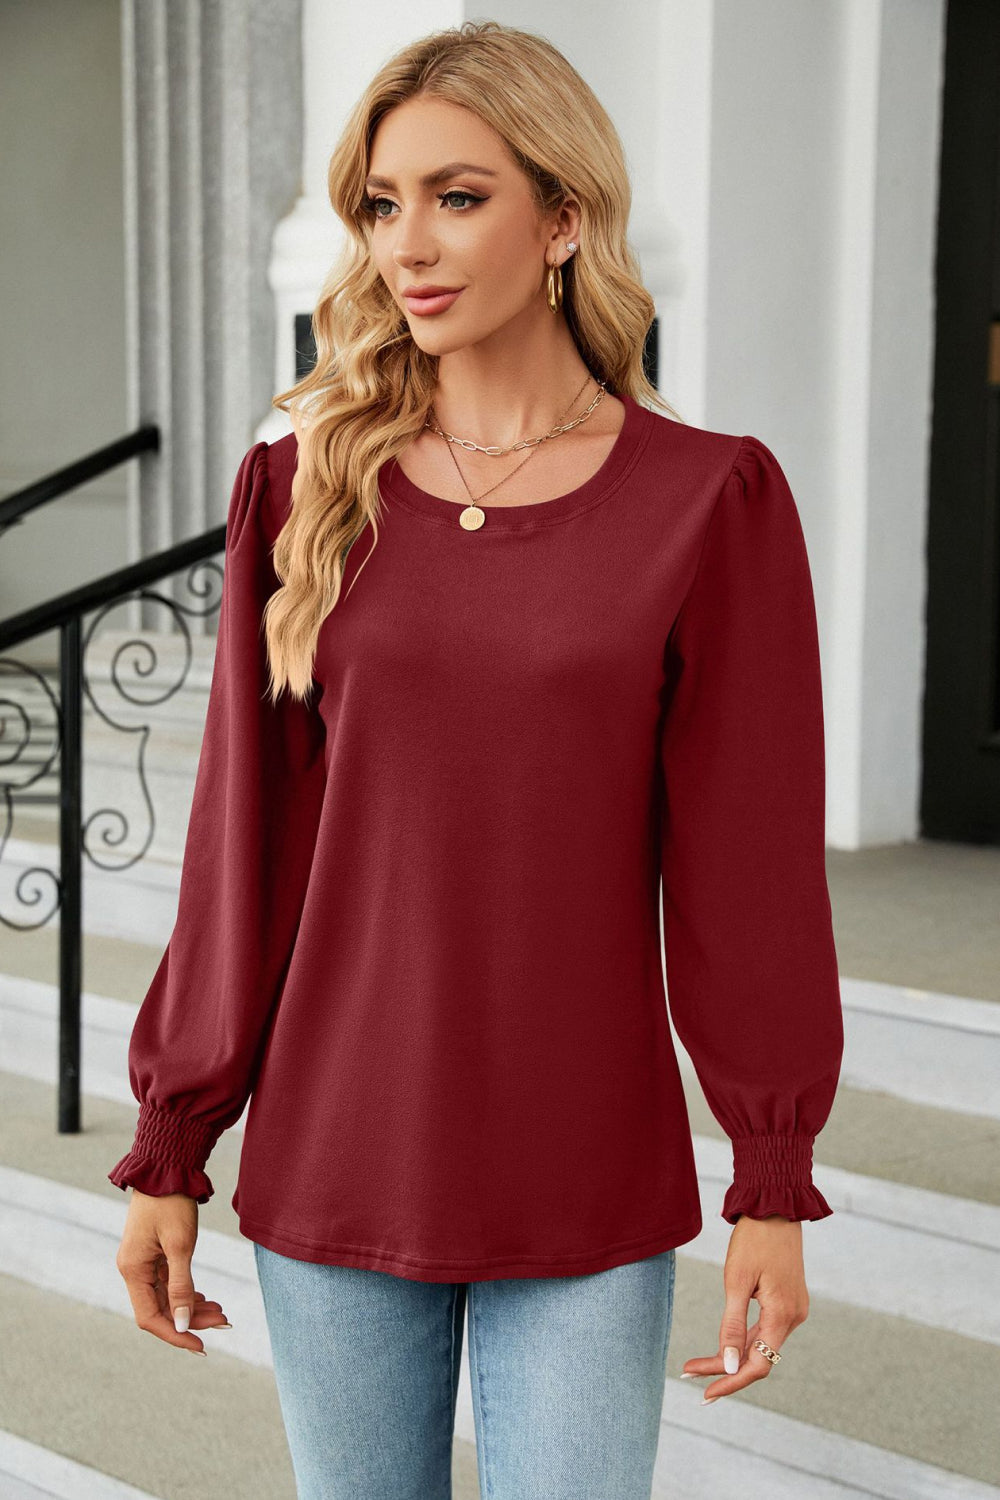 Round Neck Smocked Flounce Sleeve Blouse - Women’s Clothing & Accessories - Shirts & Tops - 11 - 2024